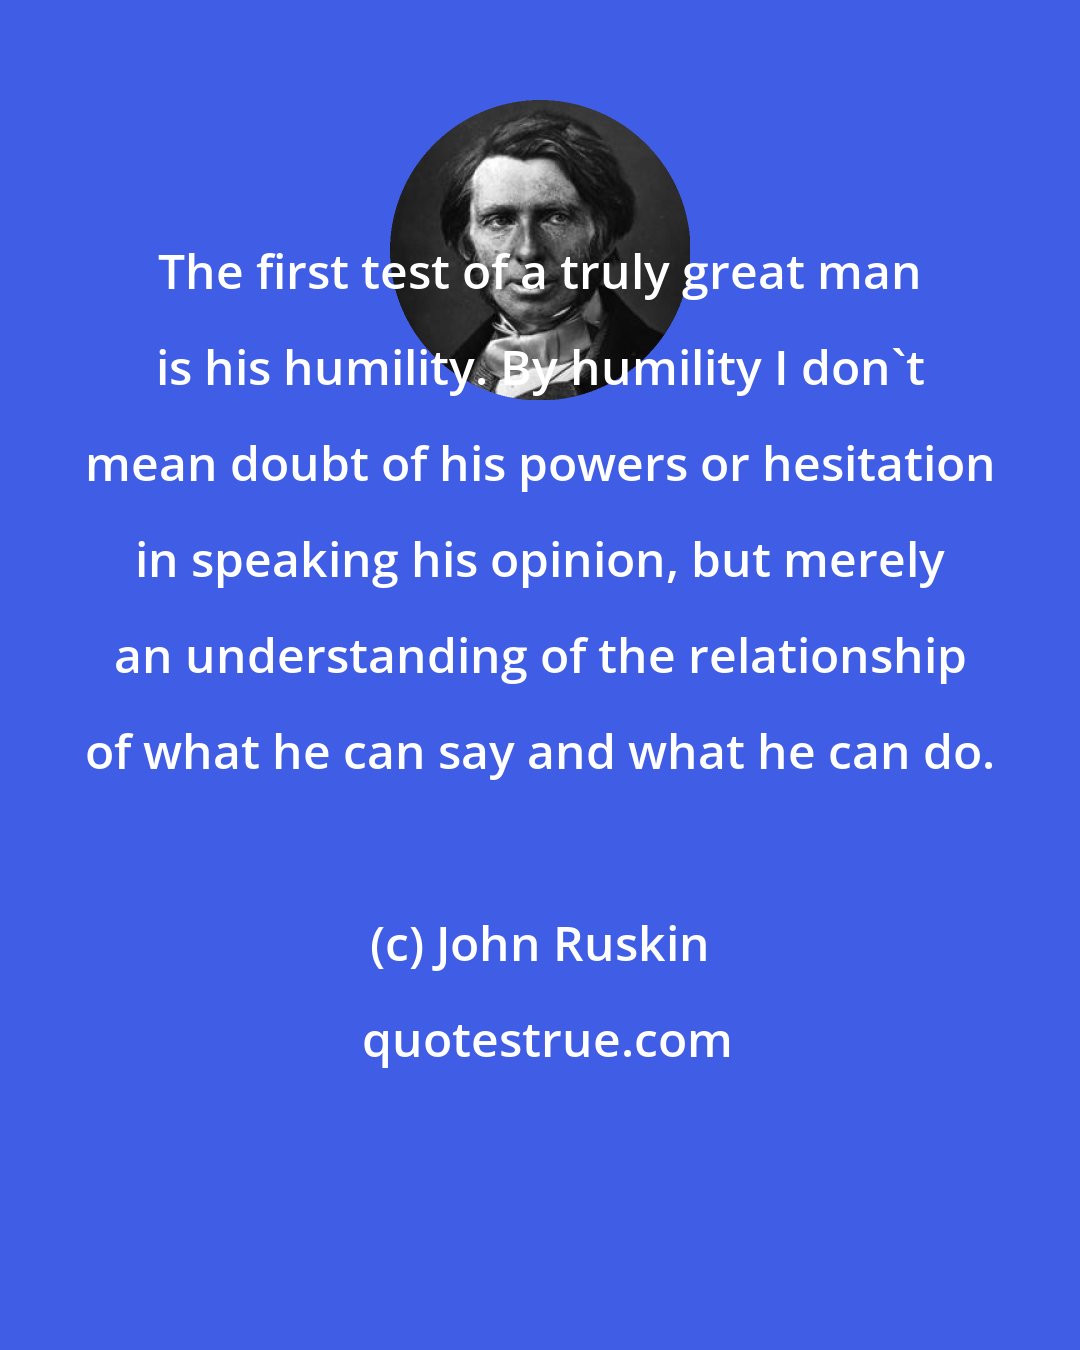 John Ruskin: The first test of a truly great man is his humility. By humility I don't mean doubt of his powers or hesitation in speaking his opinion, but merely an understanding of the relationship of what he can say and what he can do.